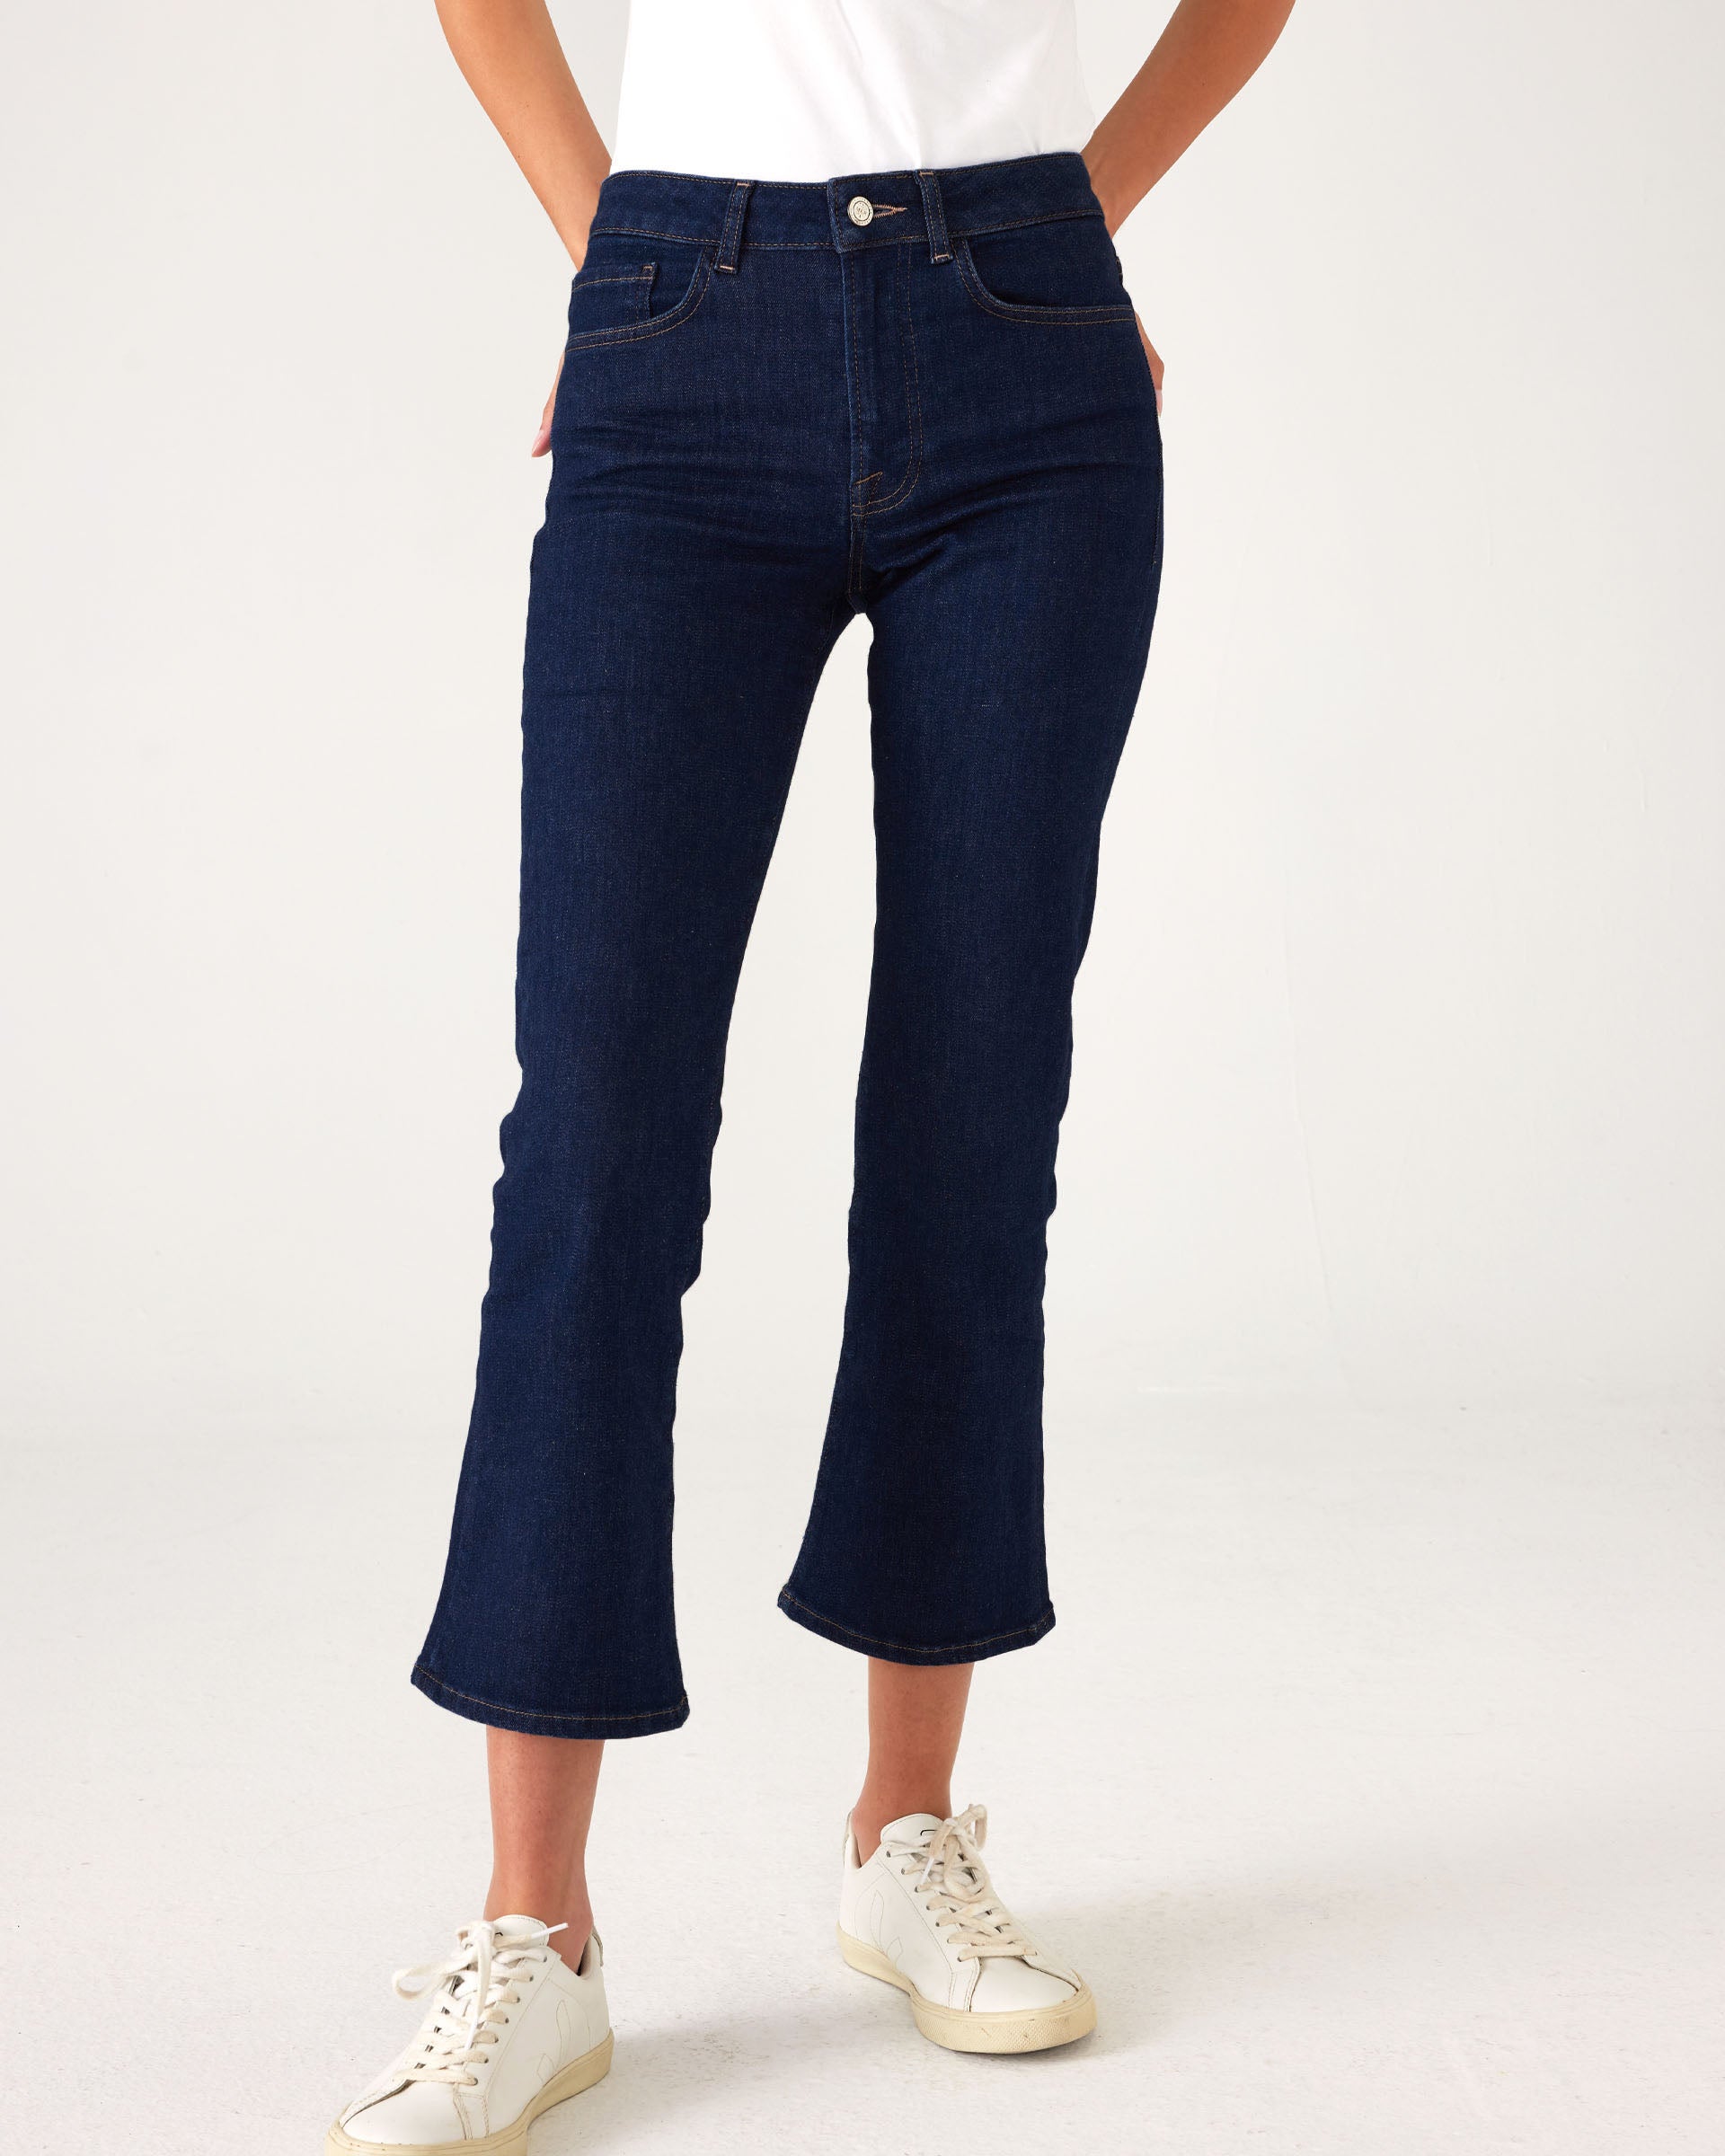 lower body of Woman showcasing Mersea moody blue Nomad cropped mini boot-cut jeans against white background